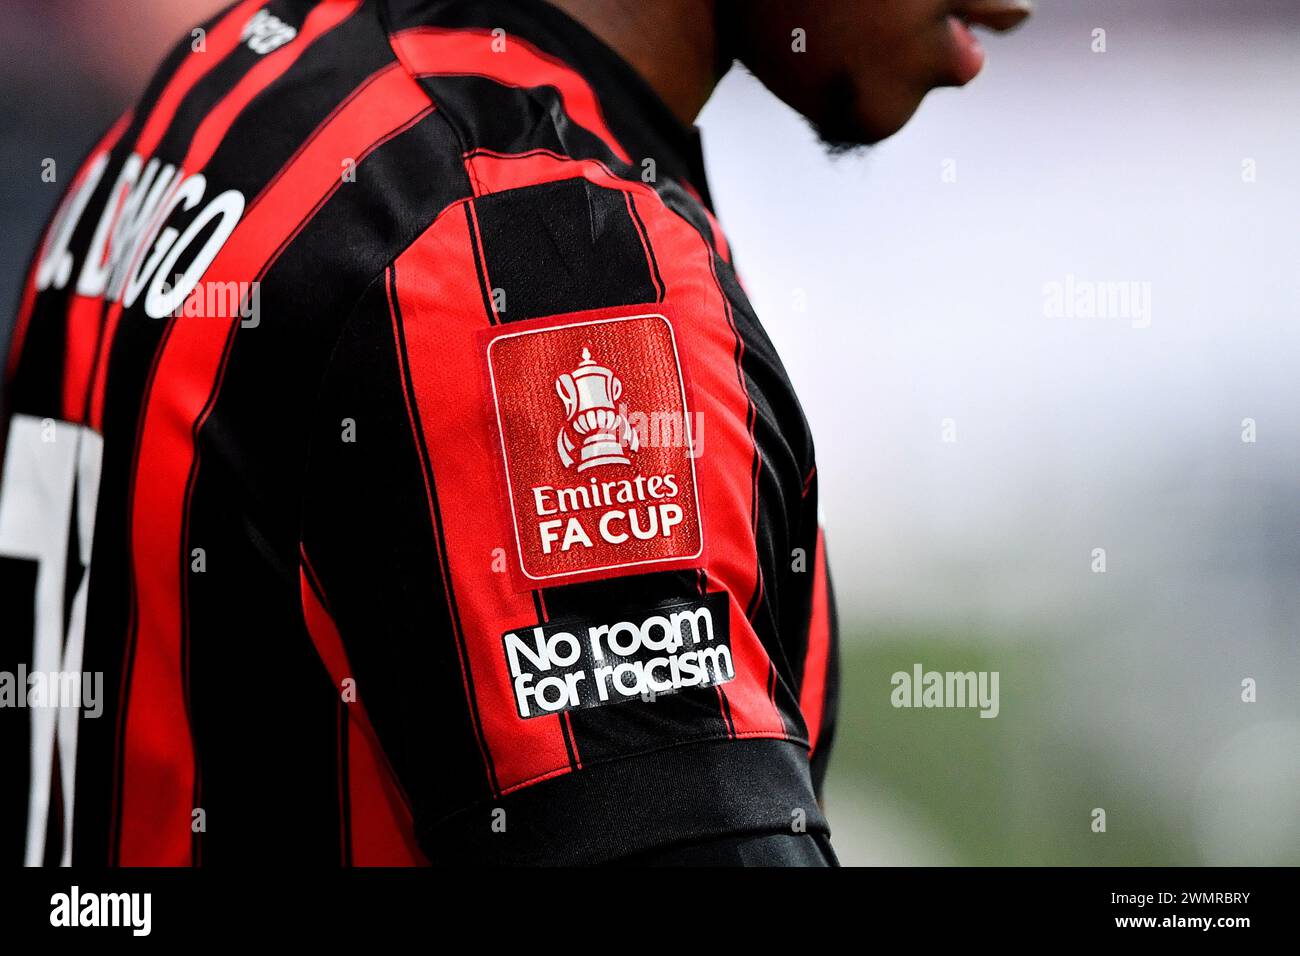 Bournemouth, UK. 27th Feb, 2024. The Emirates FA Cup logo is seen on an AFC Bournemouth shirt during the AFC Bournemouth v Leicester City FC Emirates FA Cup 5th Round match at the Vitality Stadium, Bournemouth, England, United Kingdom on 27 February 2024 Credit: Every Second Media/Alamy Live News Credit: Every Second Media/Alamy Live News Stock Photo